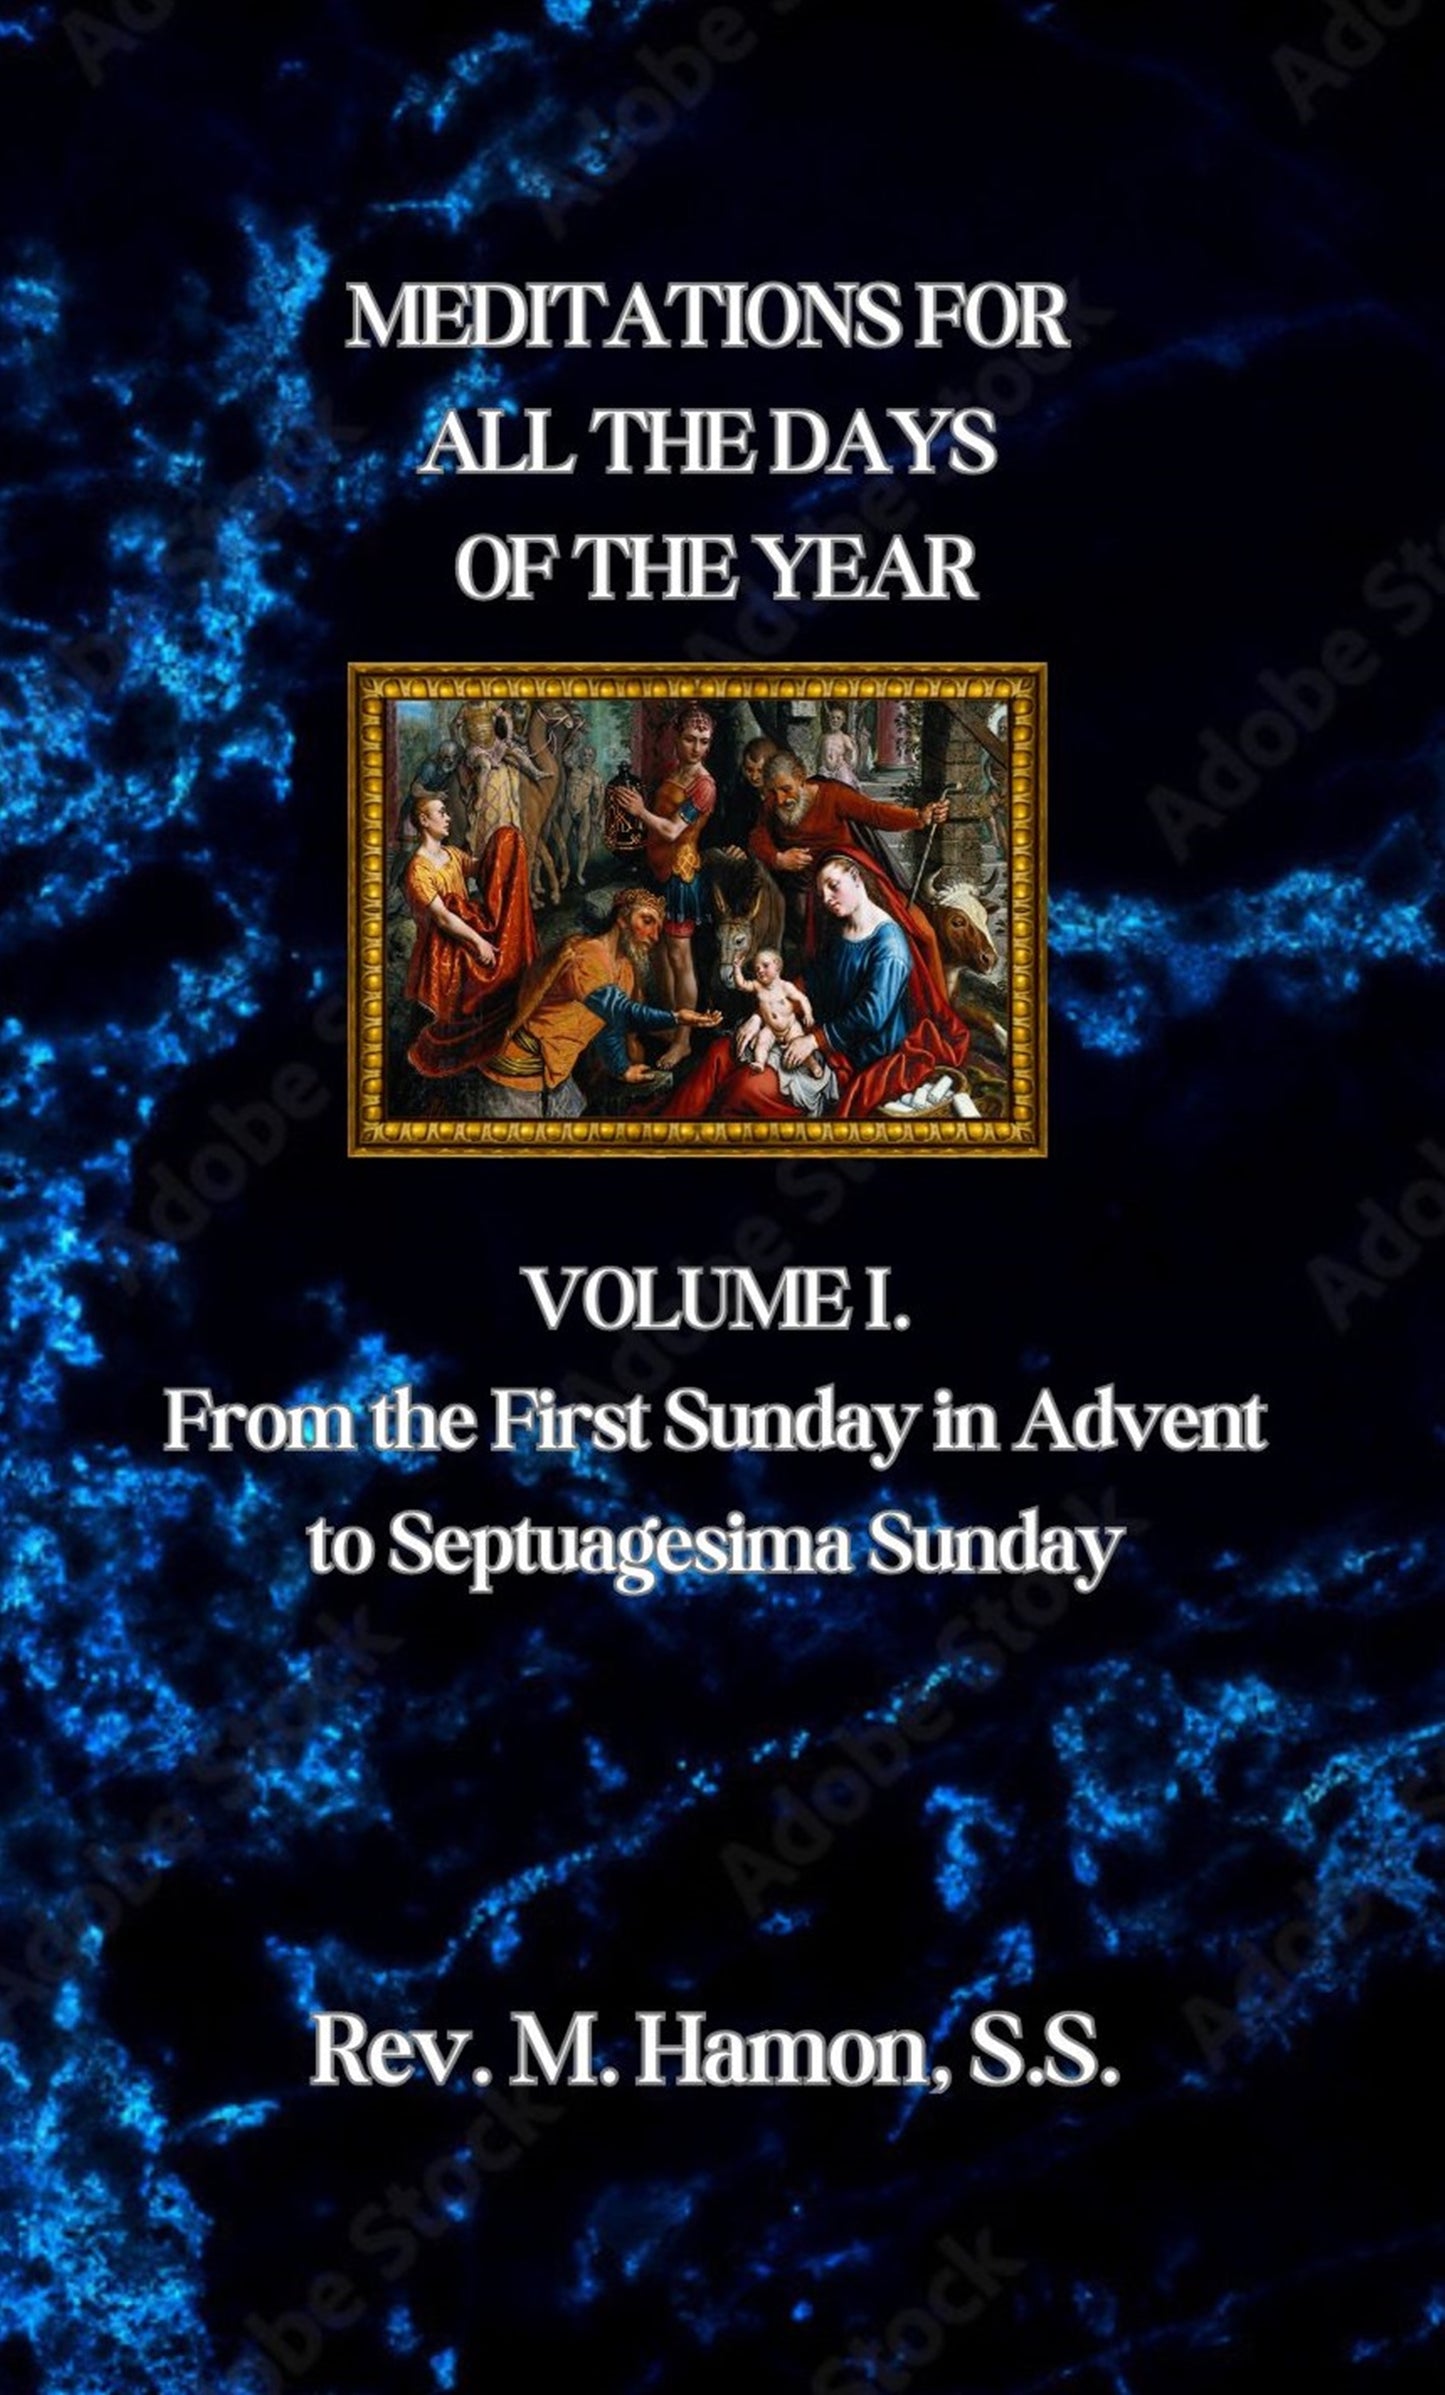 Meditations For All the Days of the Year: Volume I. From the First Sunday in Advent to Septuagesima Sunday